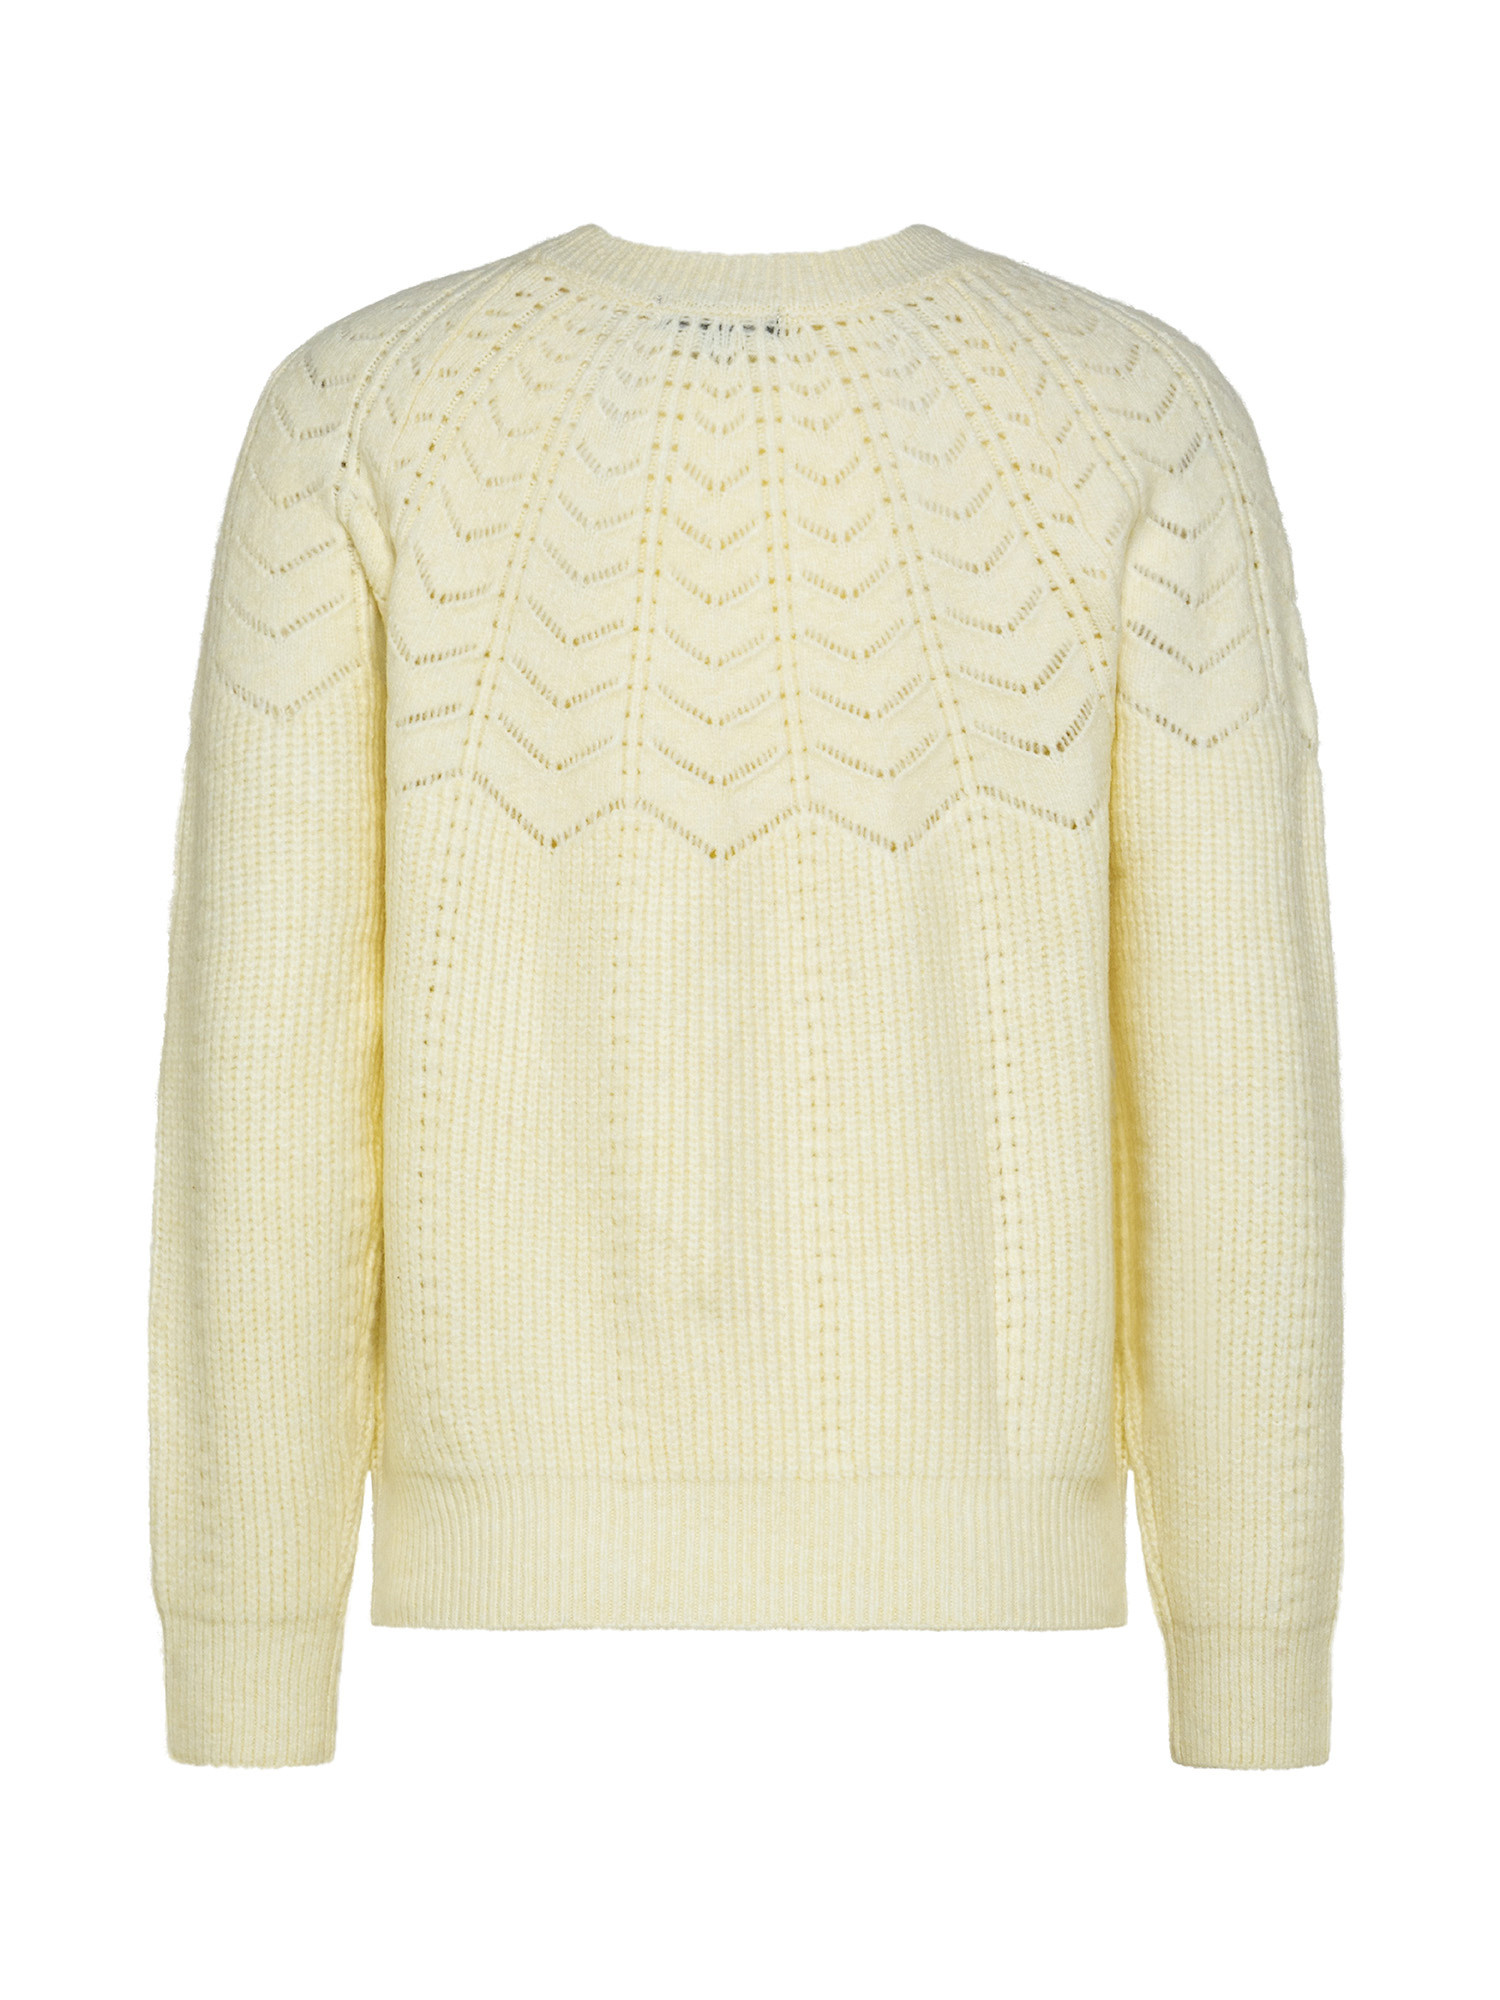 Koan - Ribbed pullover with ajour stitch, White, large image number 1